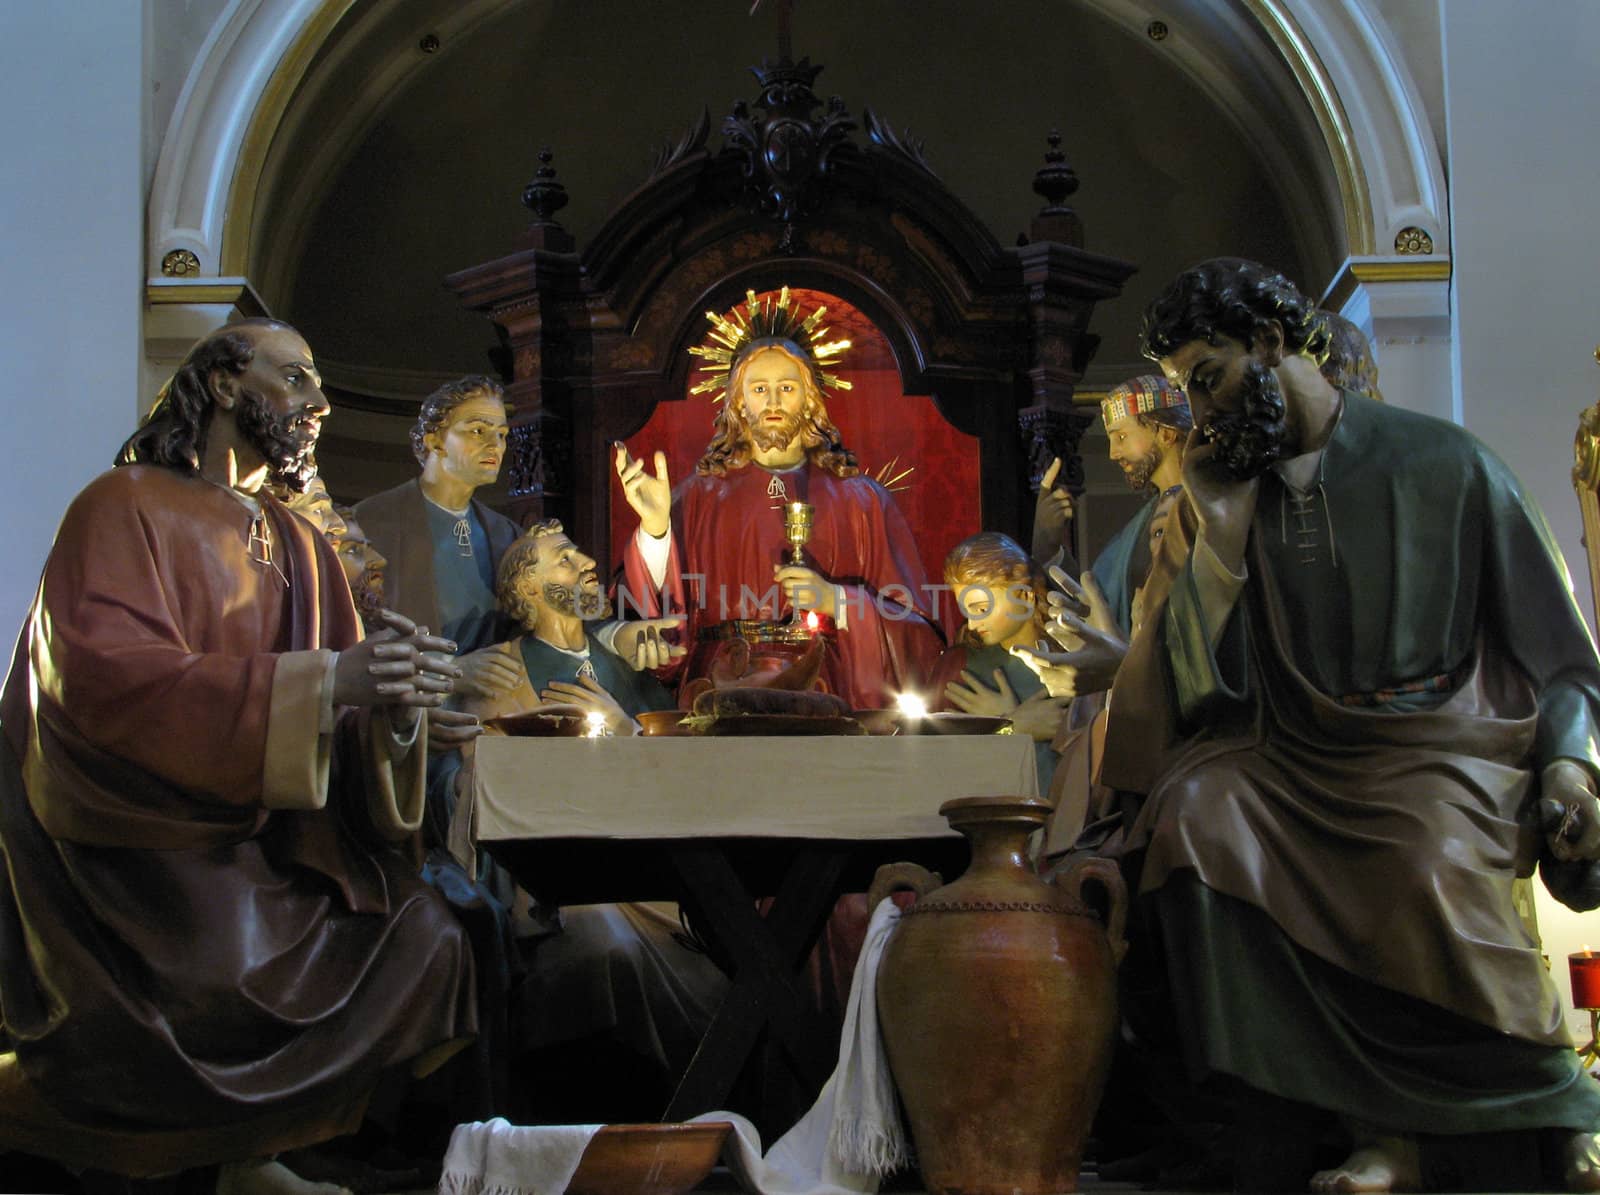 A group of statues portraying The Last Supper of Christ in Qormi, Malta.